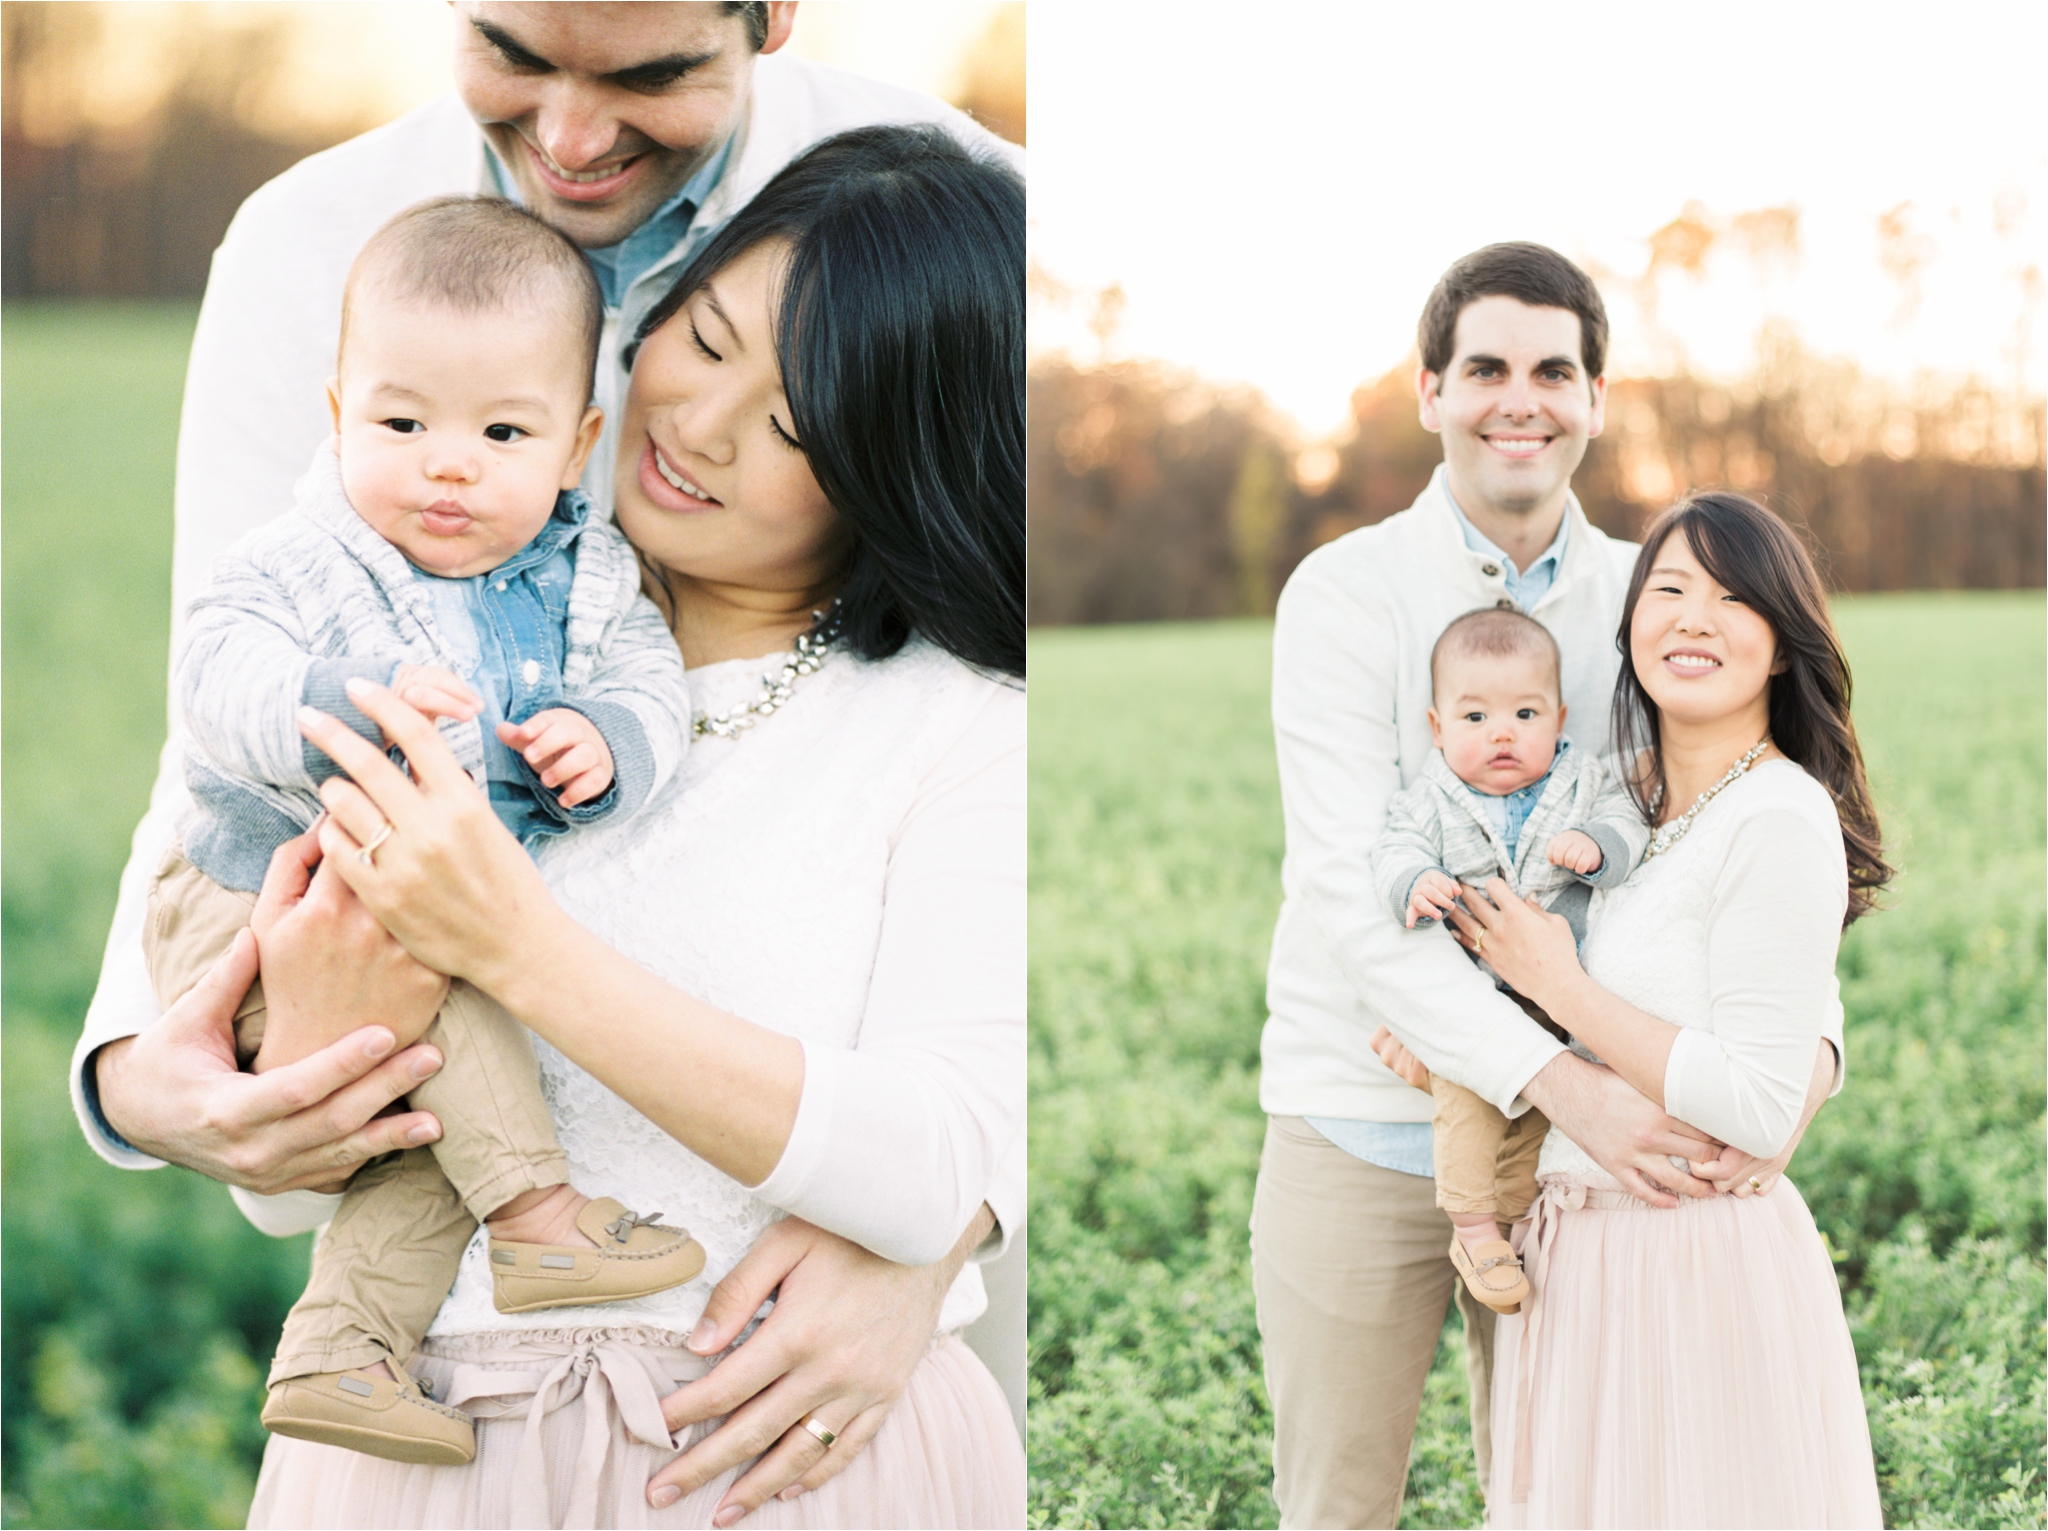 Golden Hour Family Session in Hershey, PA by Hillary Muelleck Photography // hillarymuelleck.com